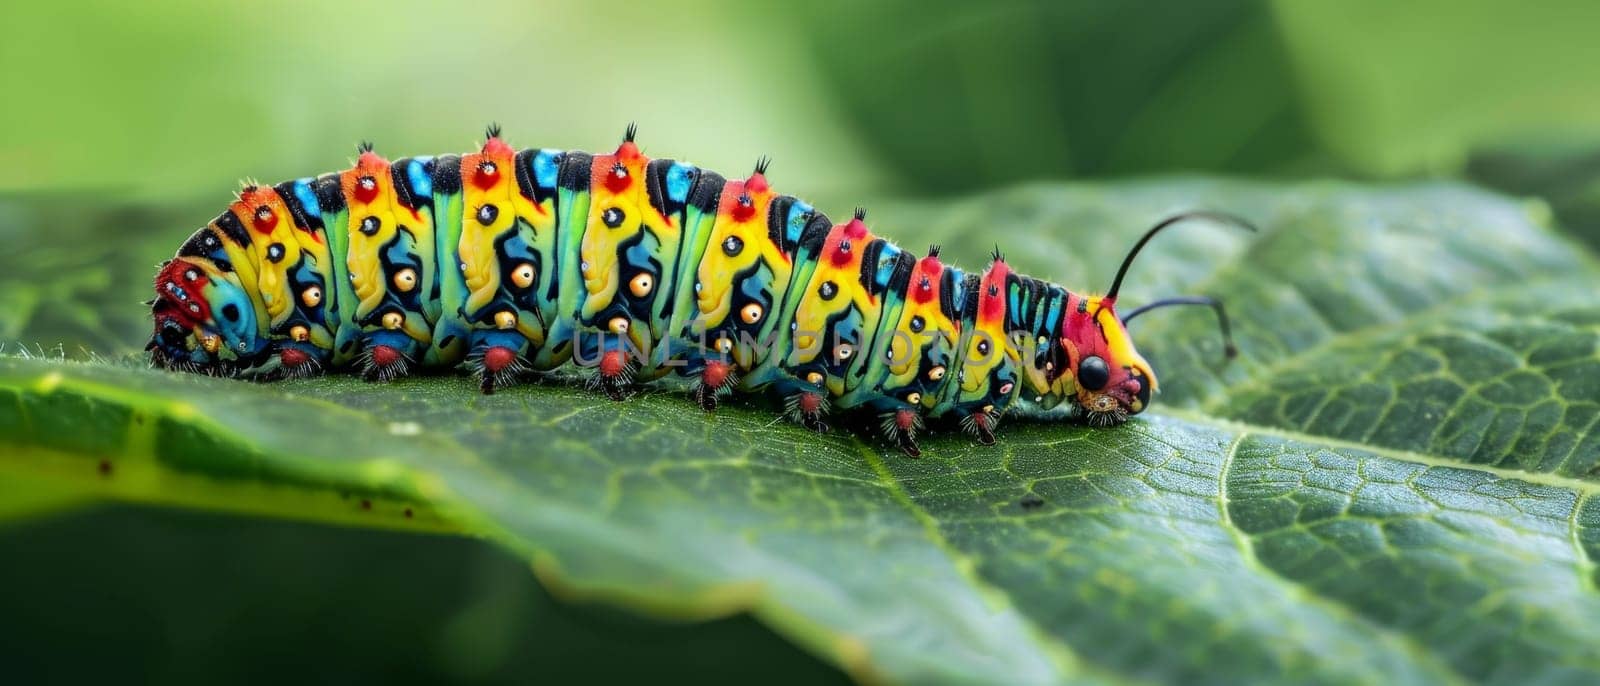 A vivid caterpillar adorned with colorful spots and stripes in a natural setting, a macro photographer's delight